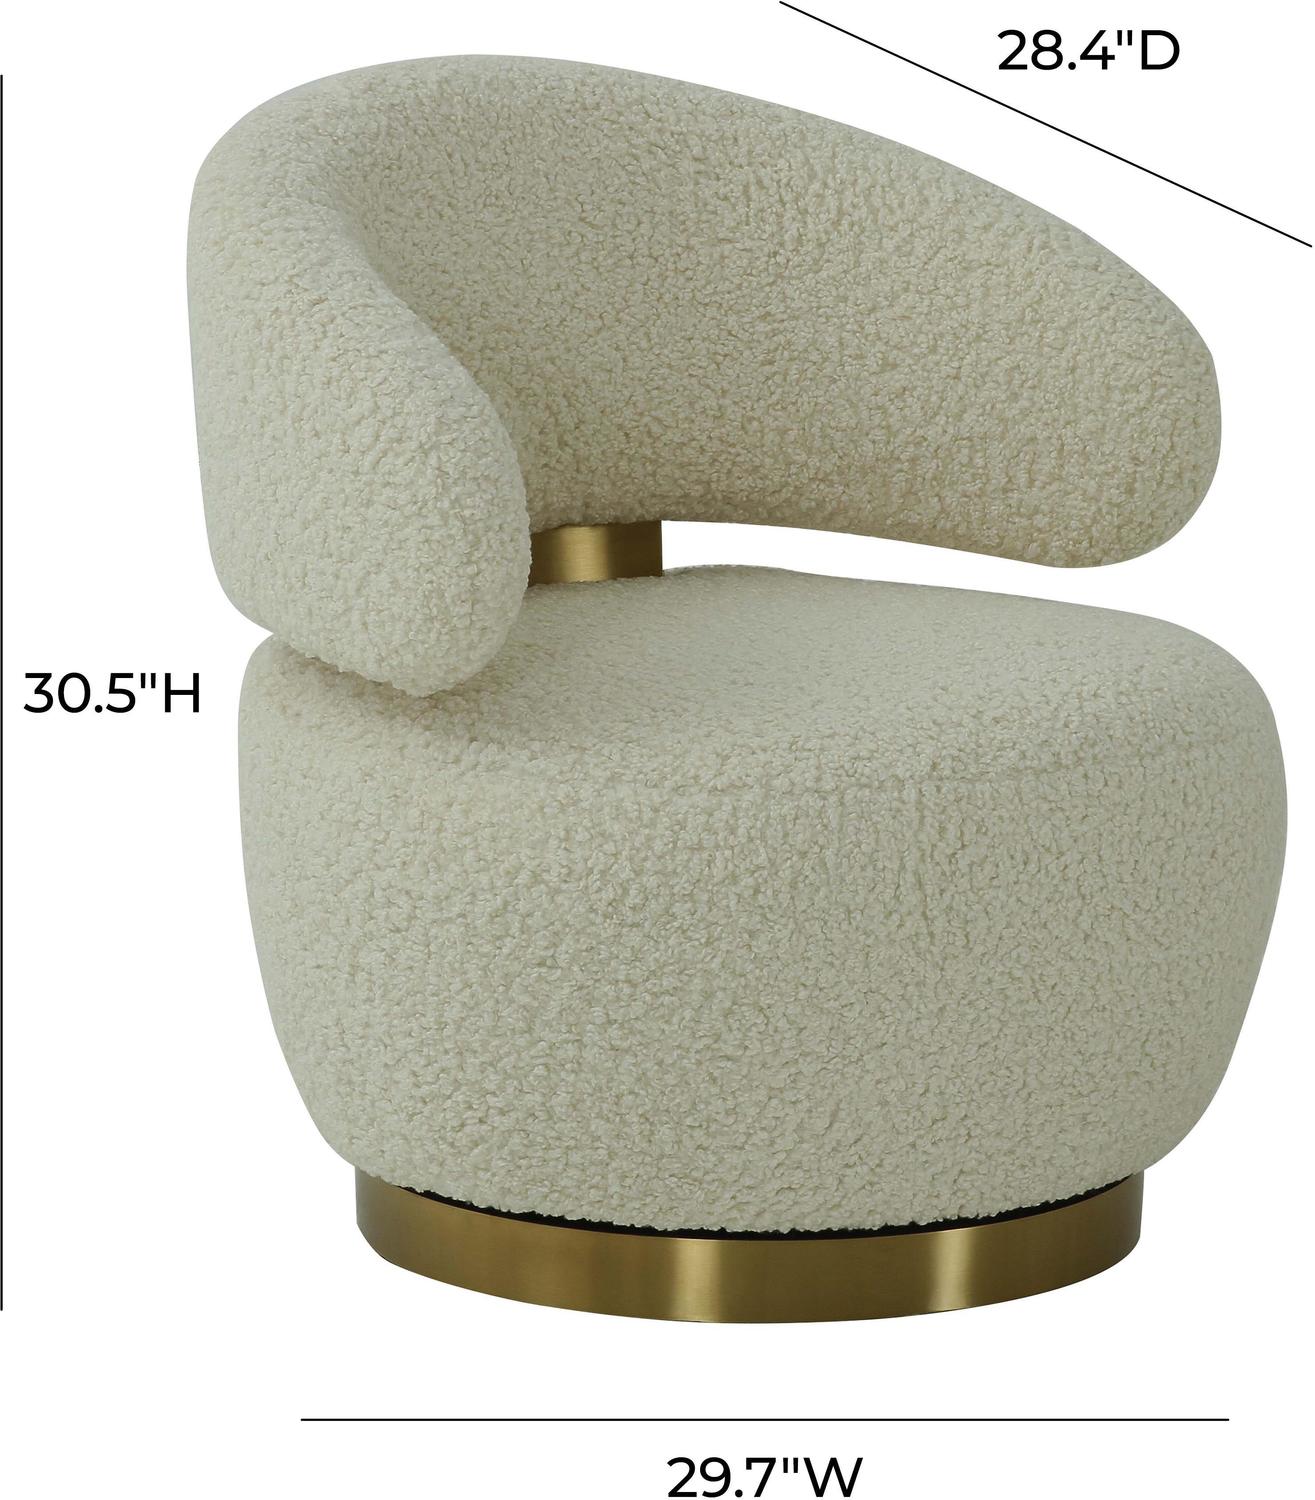 swivel chaise lounge chair Contemporary Design Furniture Accent Chairs Chairs Beige